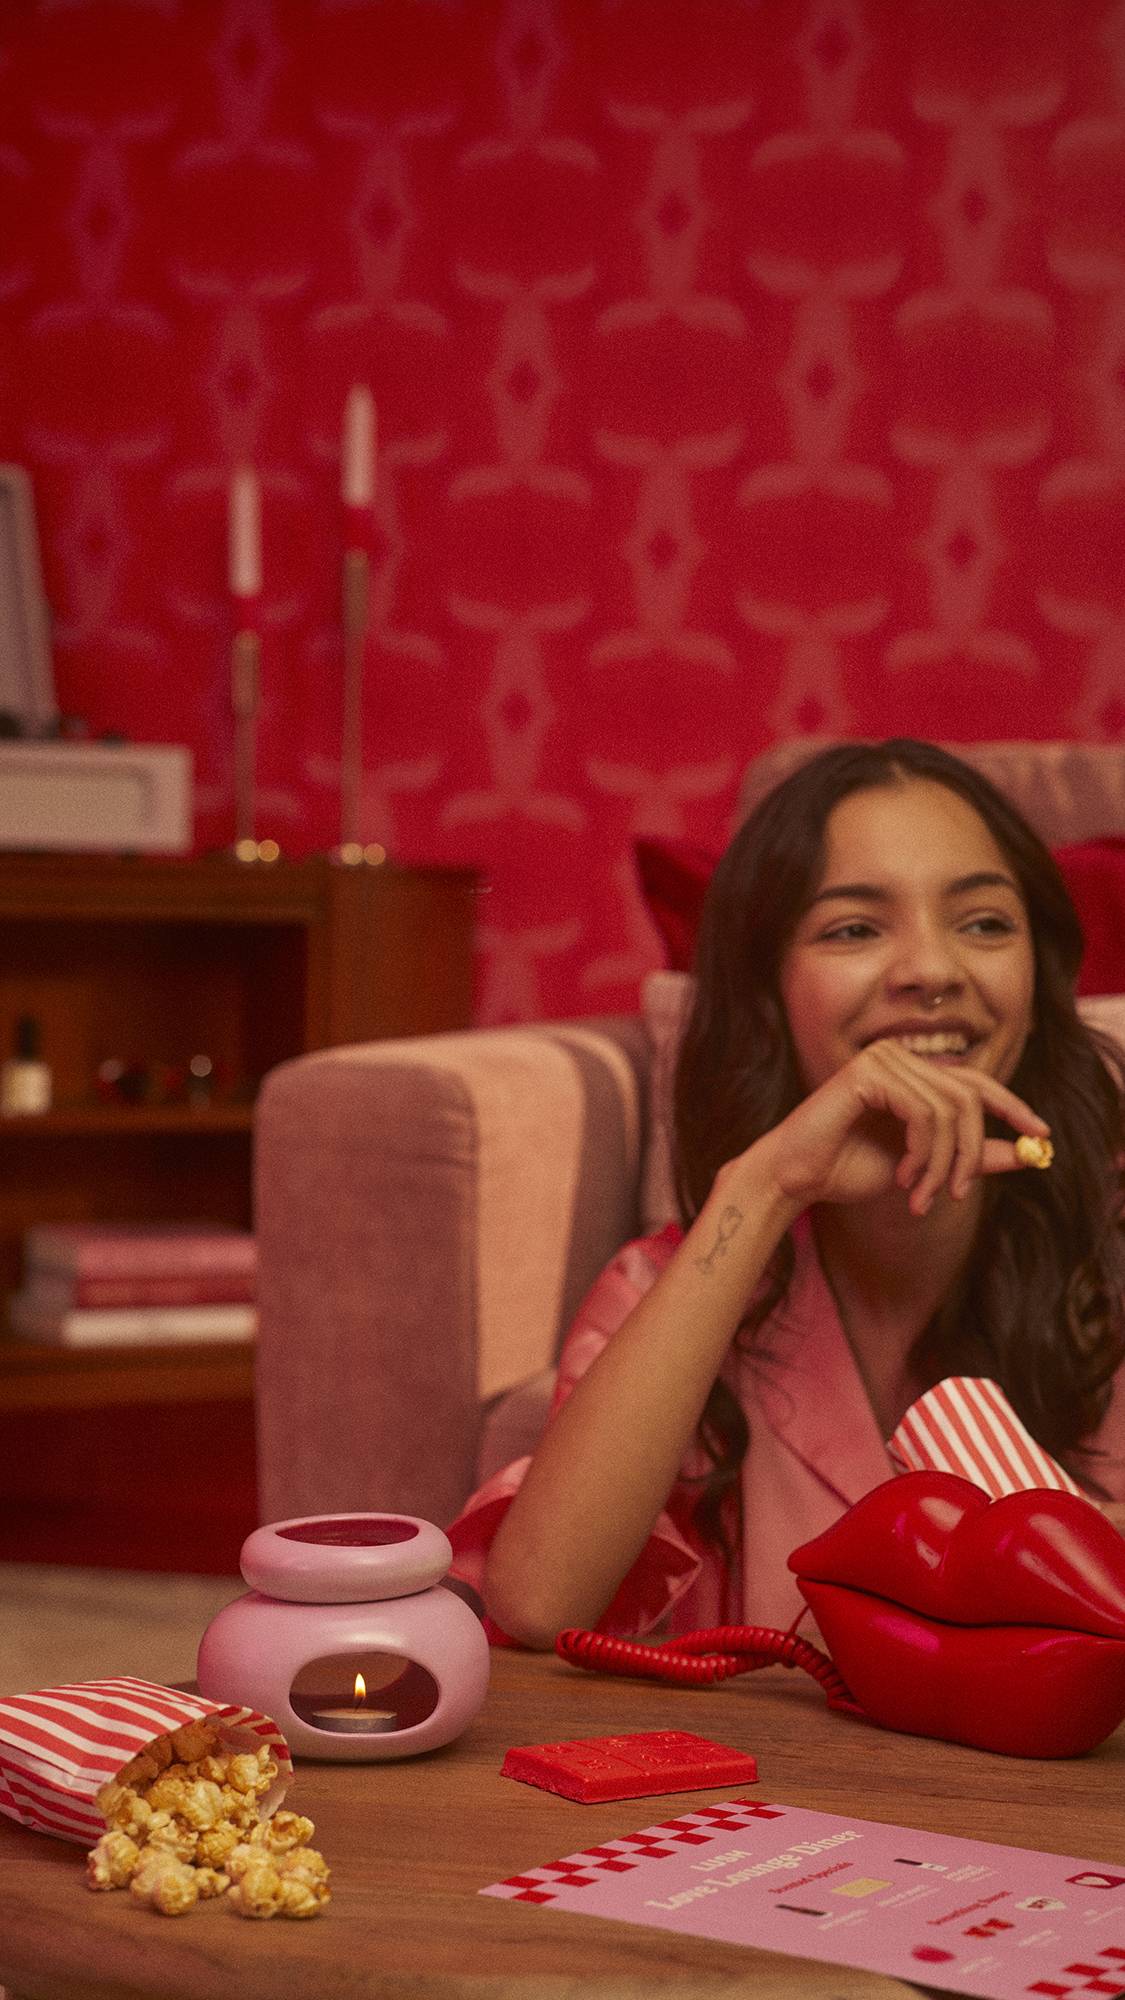 The model. is in a red-themed room, eating popcorn as the product slowly melts in the wax burner.